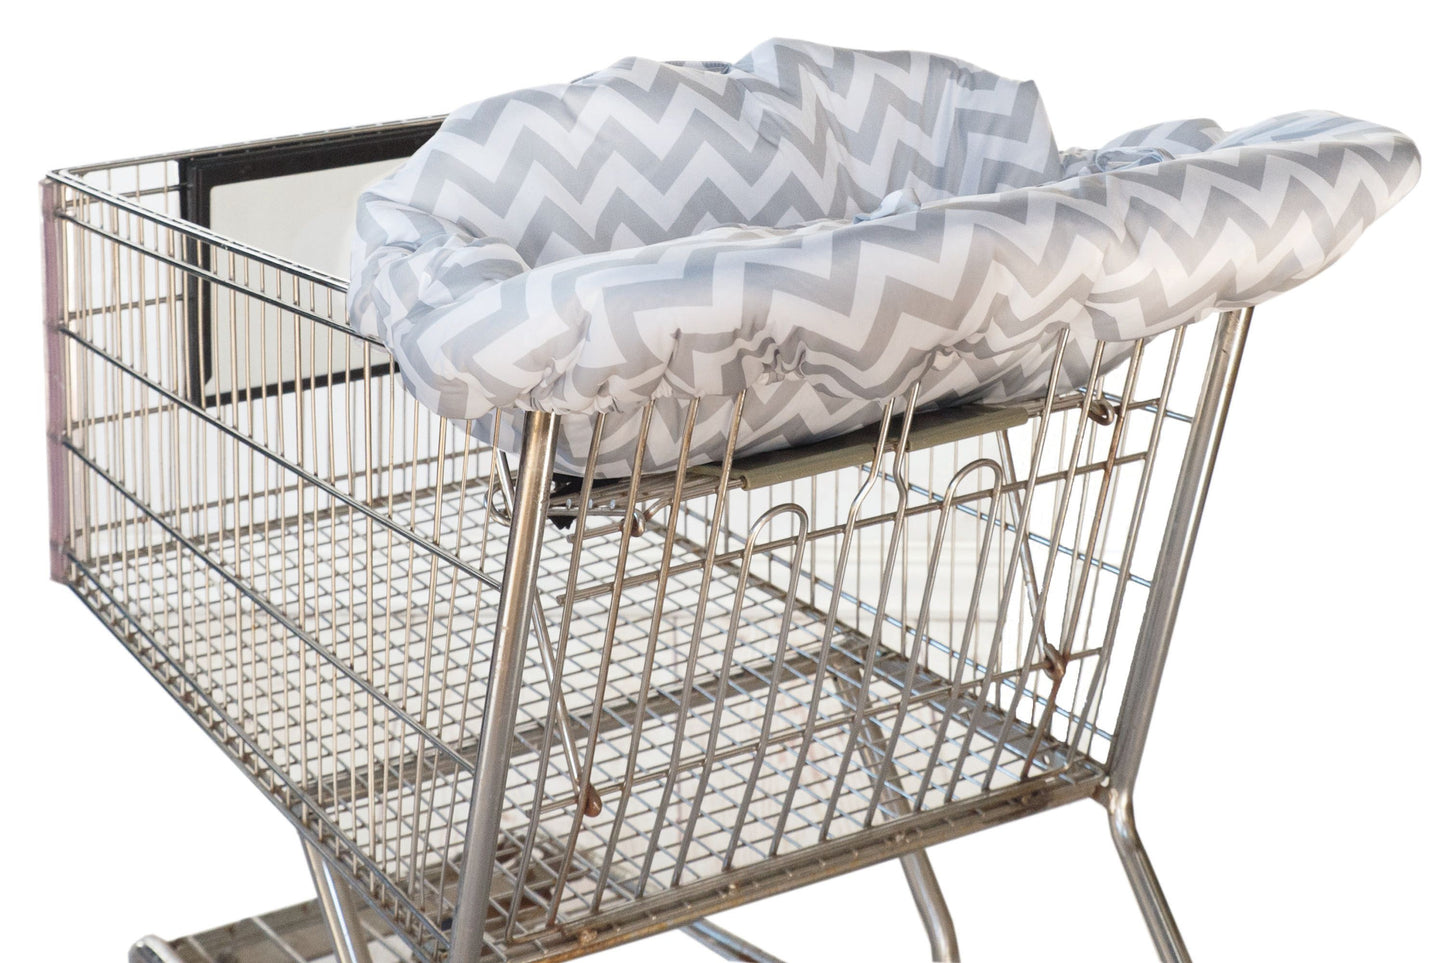 Baby's Itzy Ritzy cotton grey chevron shopping cart and high chair cover